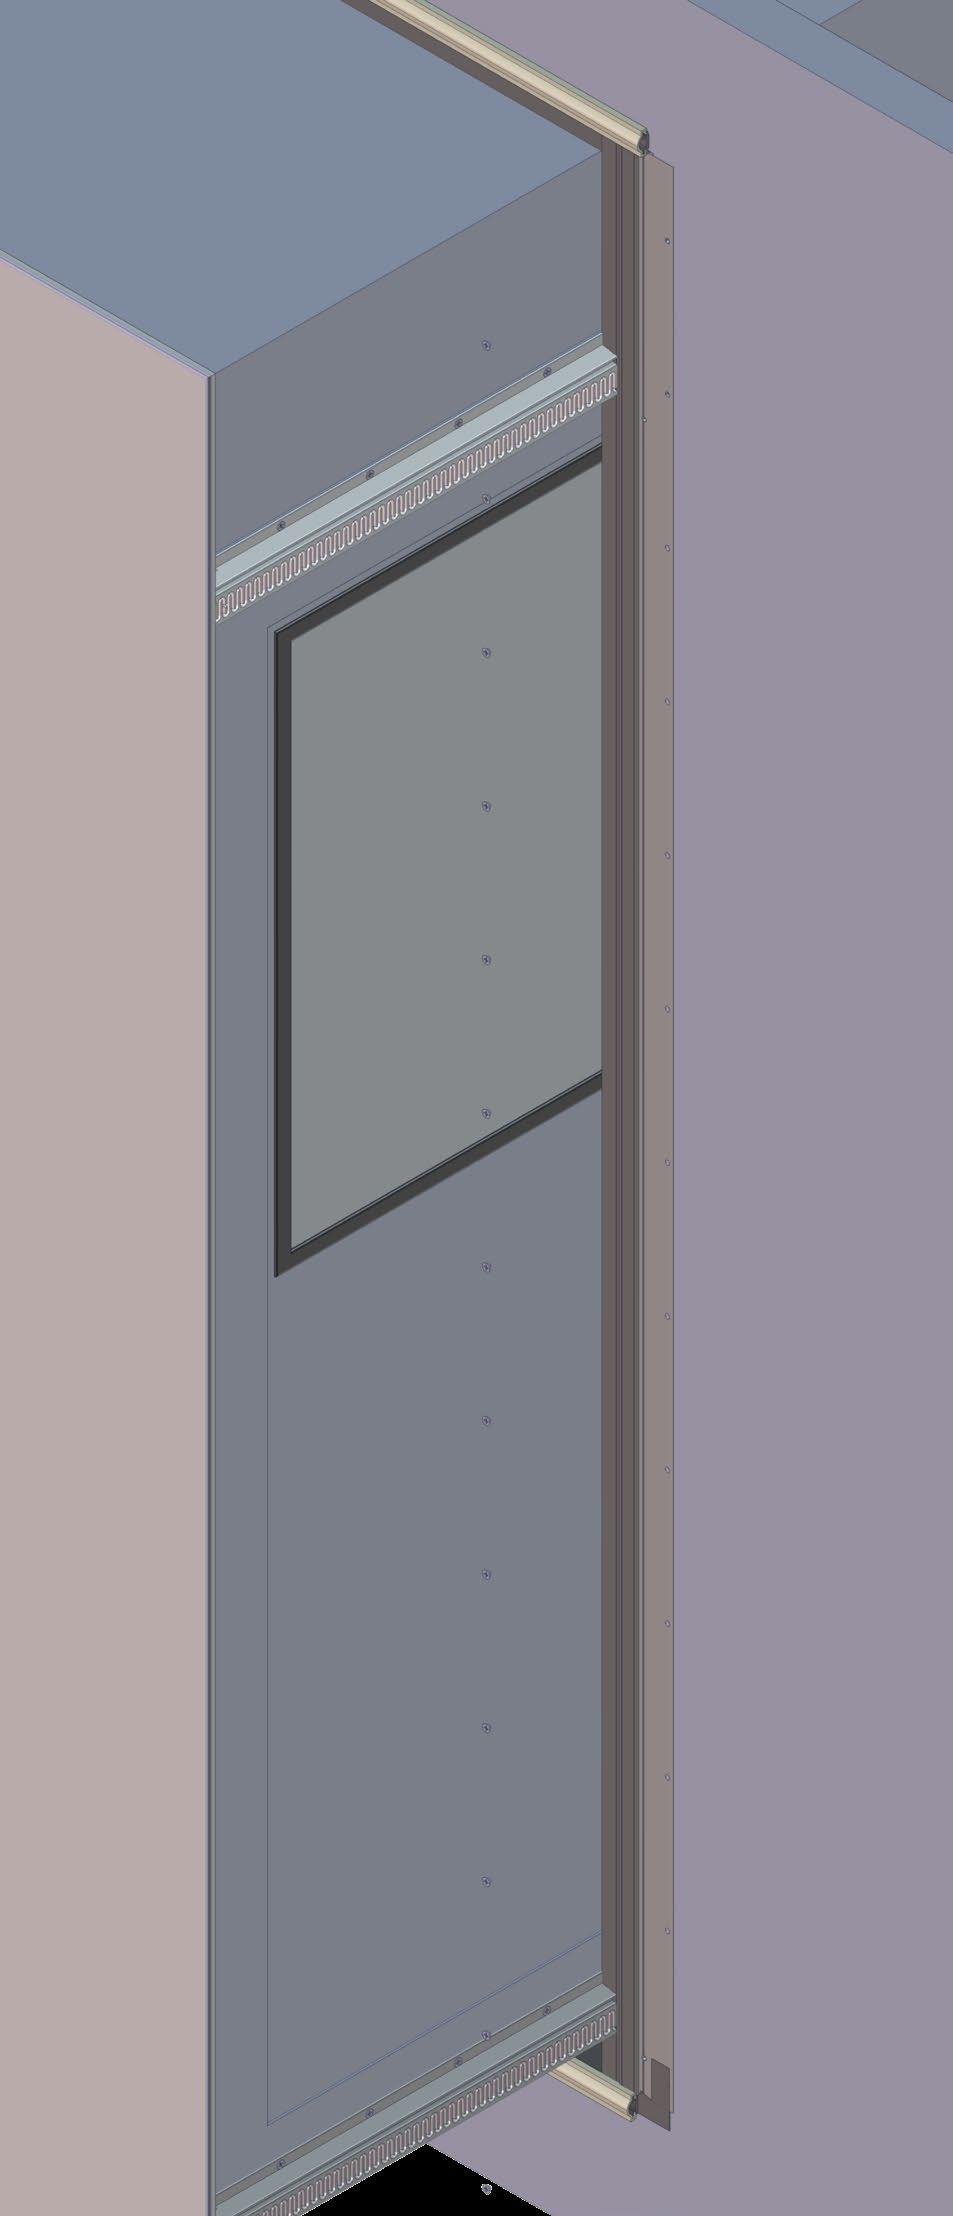 2. Insert the completed slide room into wall opening, taking care to center "H" columns within the opening. 3. Center the box in slide opening. 4.